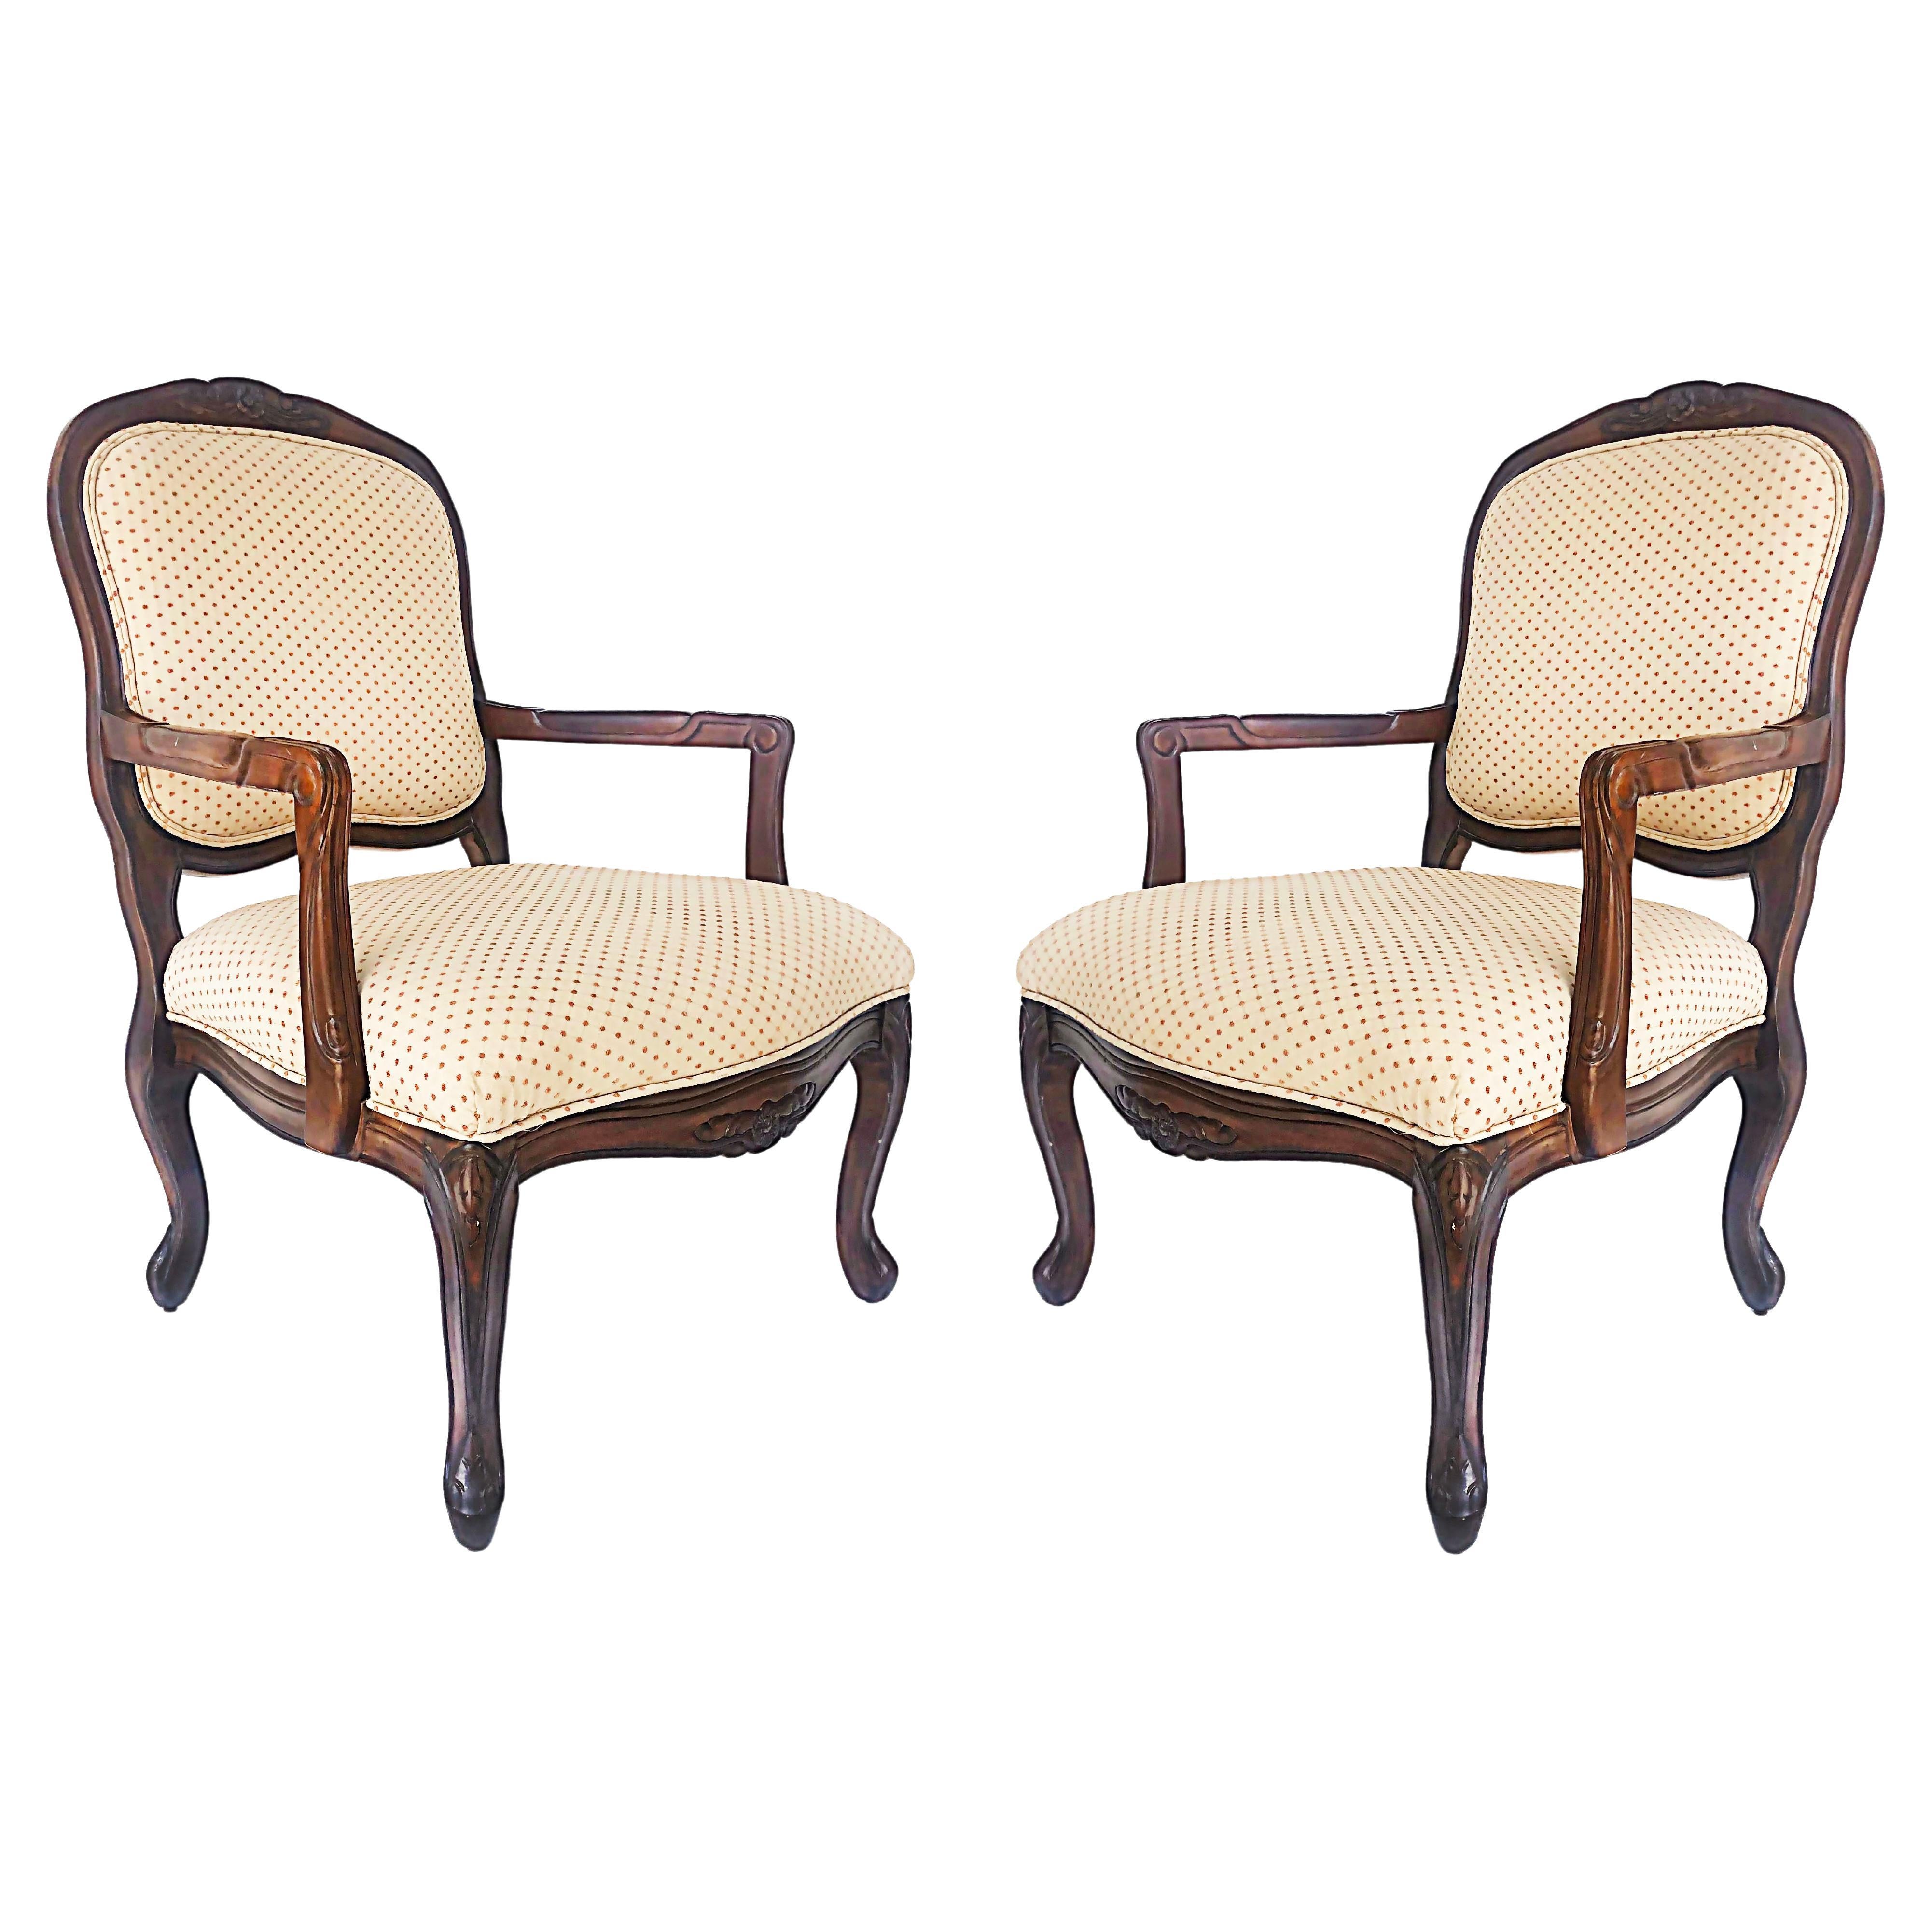 French Provincial Louis XV Style Fauteuils with Cabriole Legs For Sale